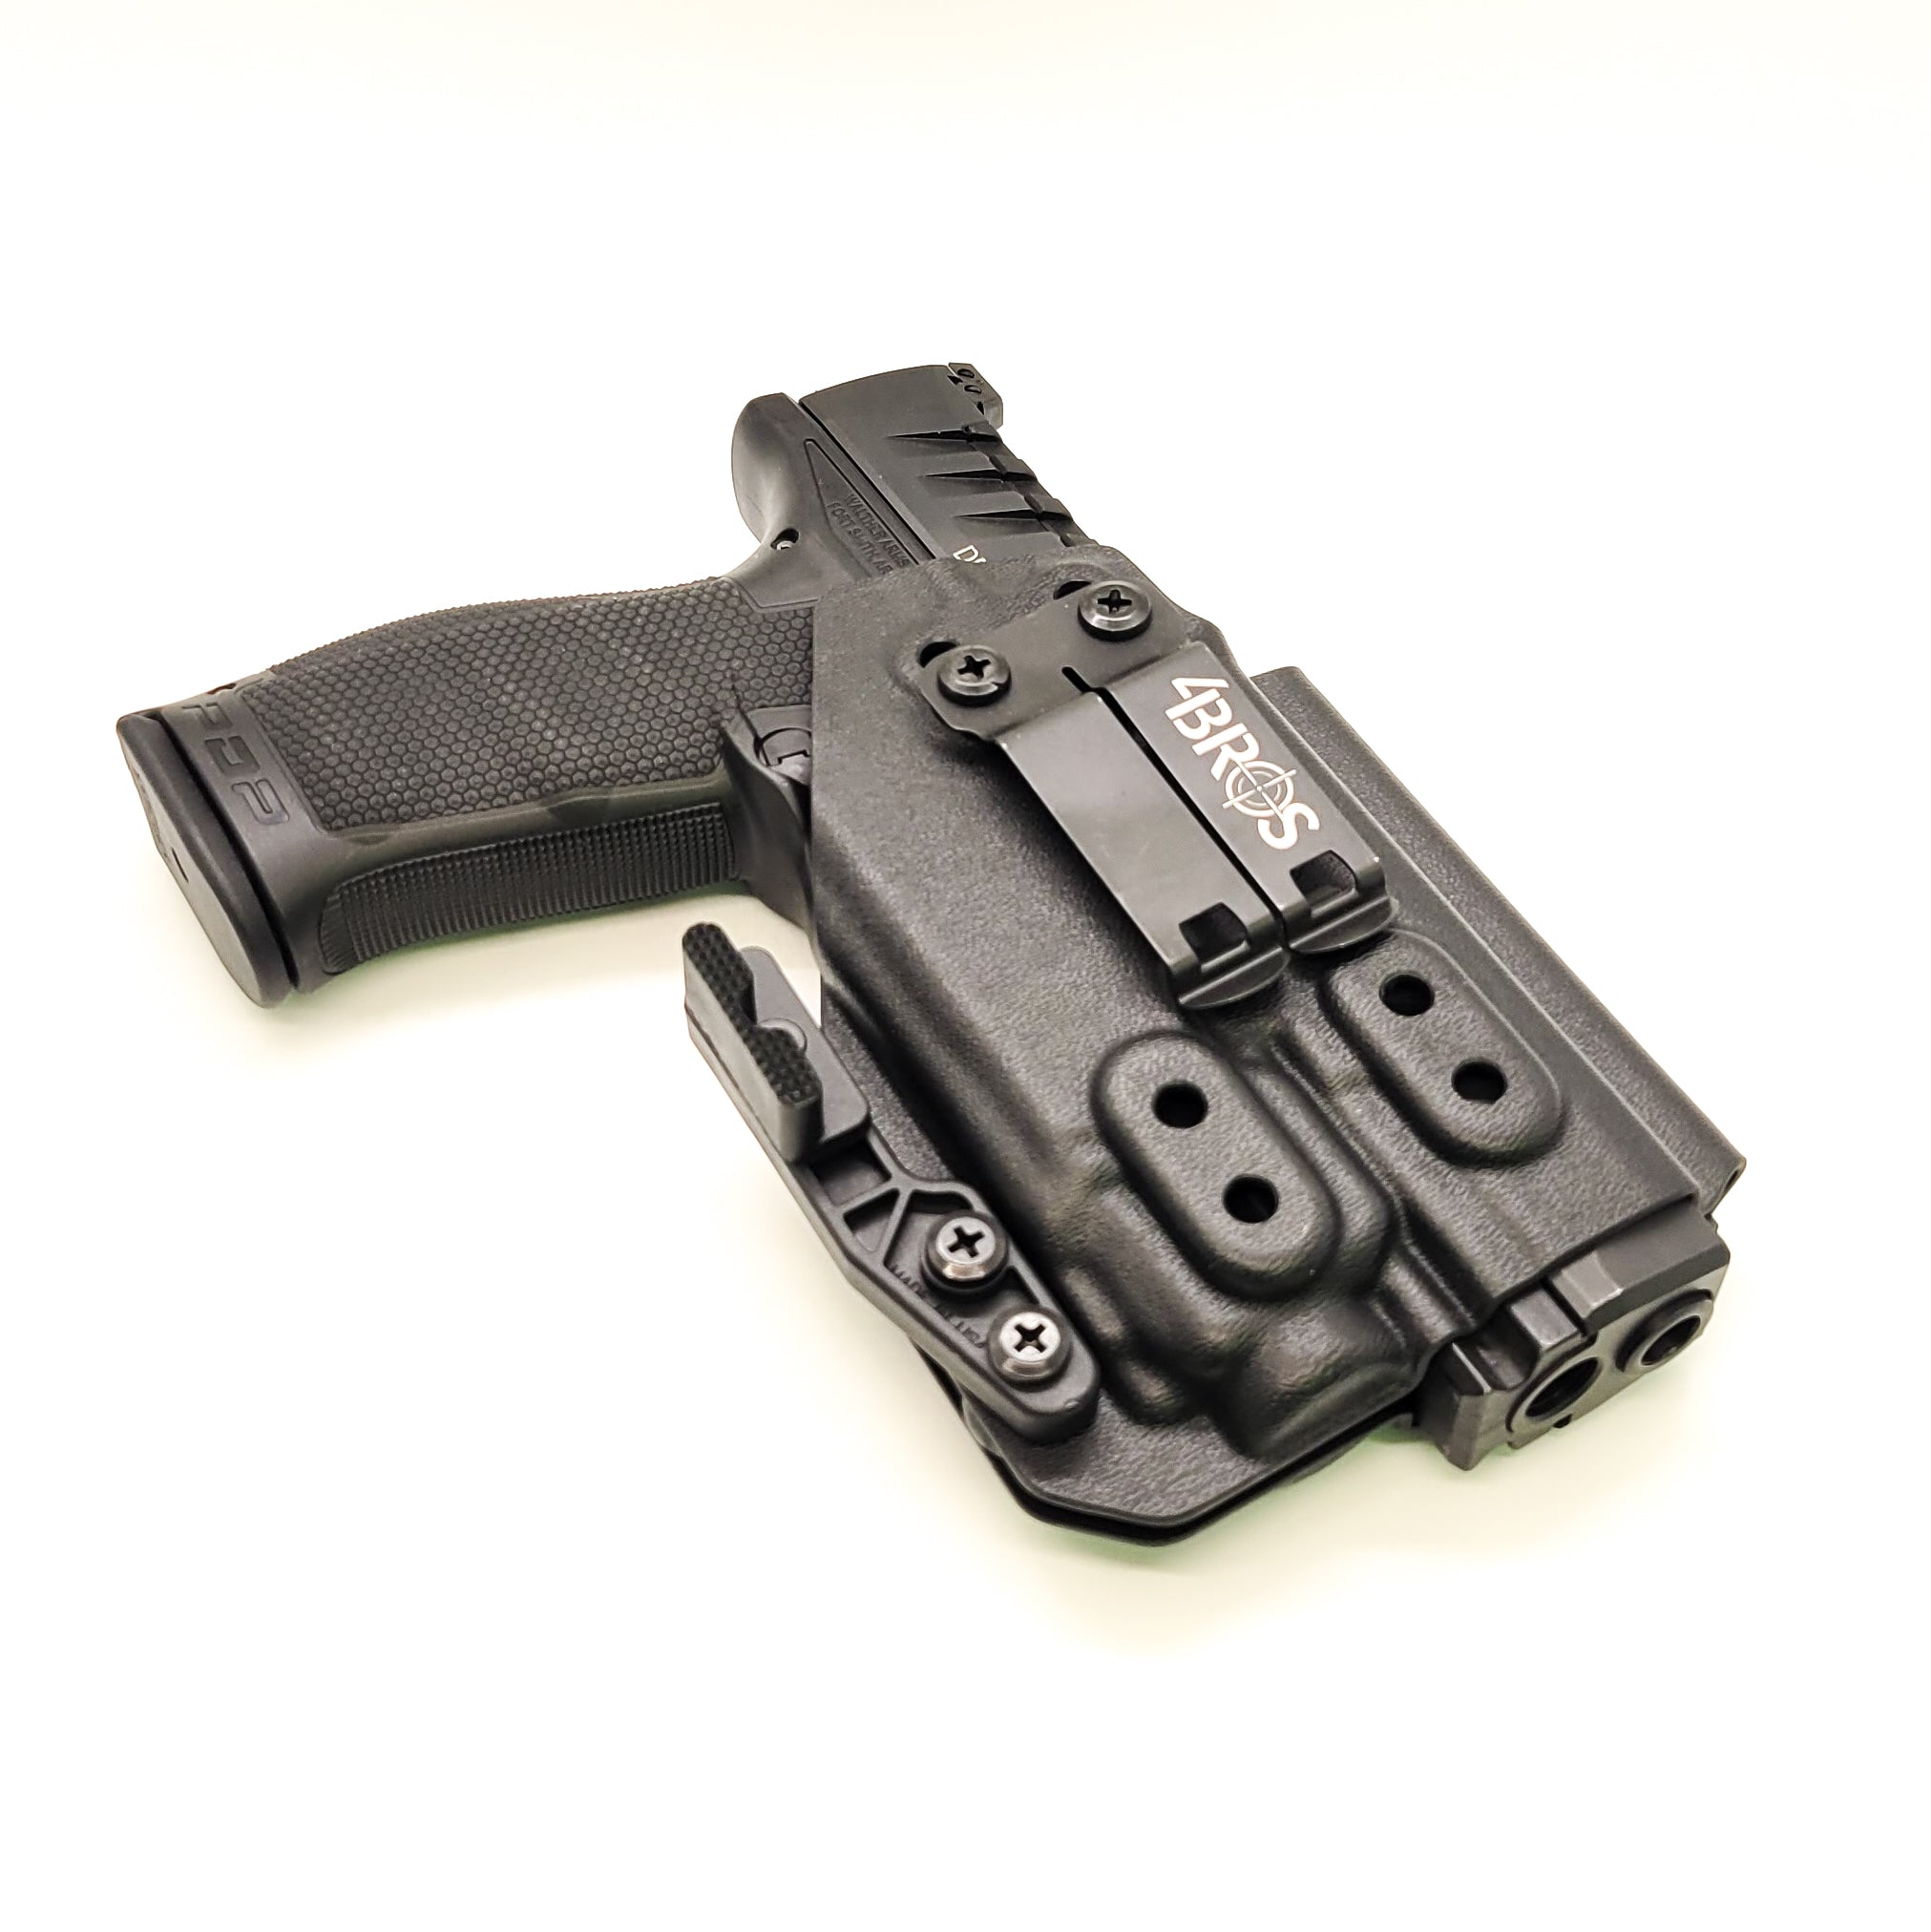 For the best concealed carry Inside Waistband IWB AIWB Holster designed to fit the Walther PDP Compact 4" pistol with Streamlight TLR-8 on the firearm, shop Four Brothers Holsters. Cut for red dot sight, full sweat guard, adjustable retention & open muzzle for threaded barrels & compensators.